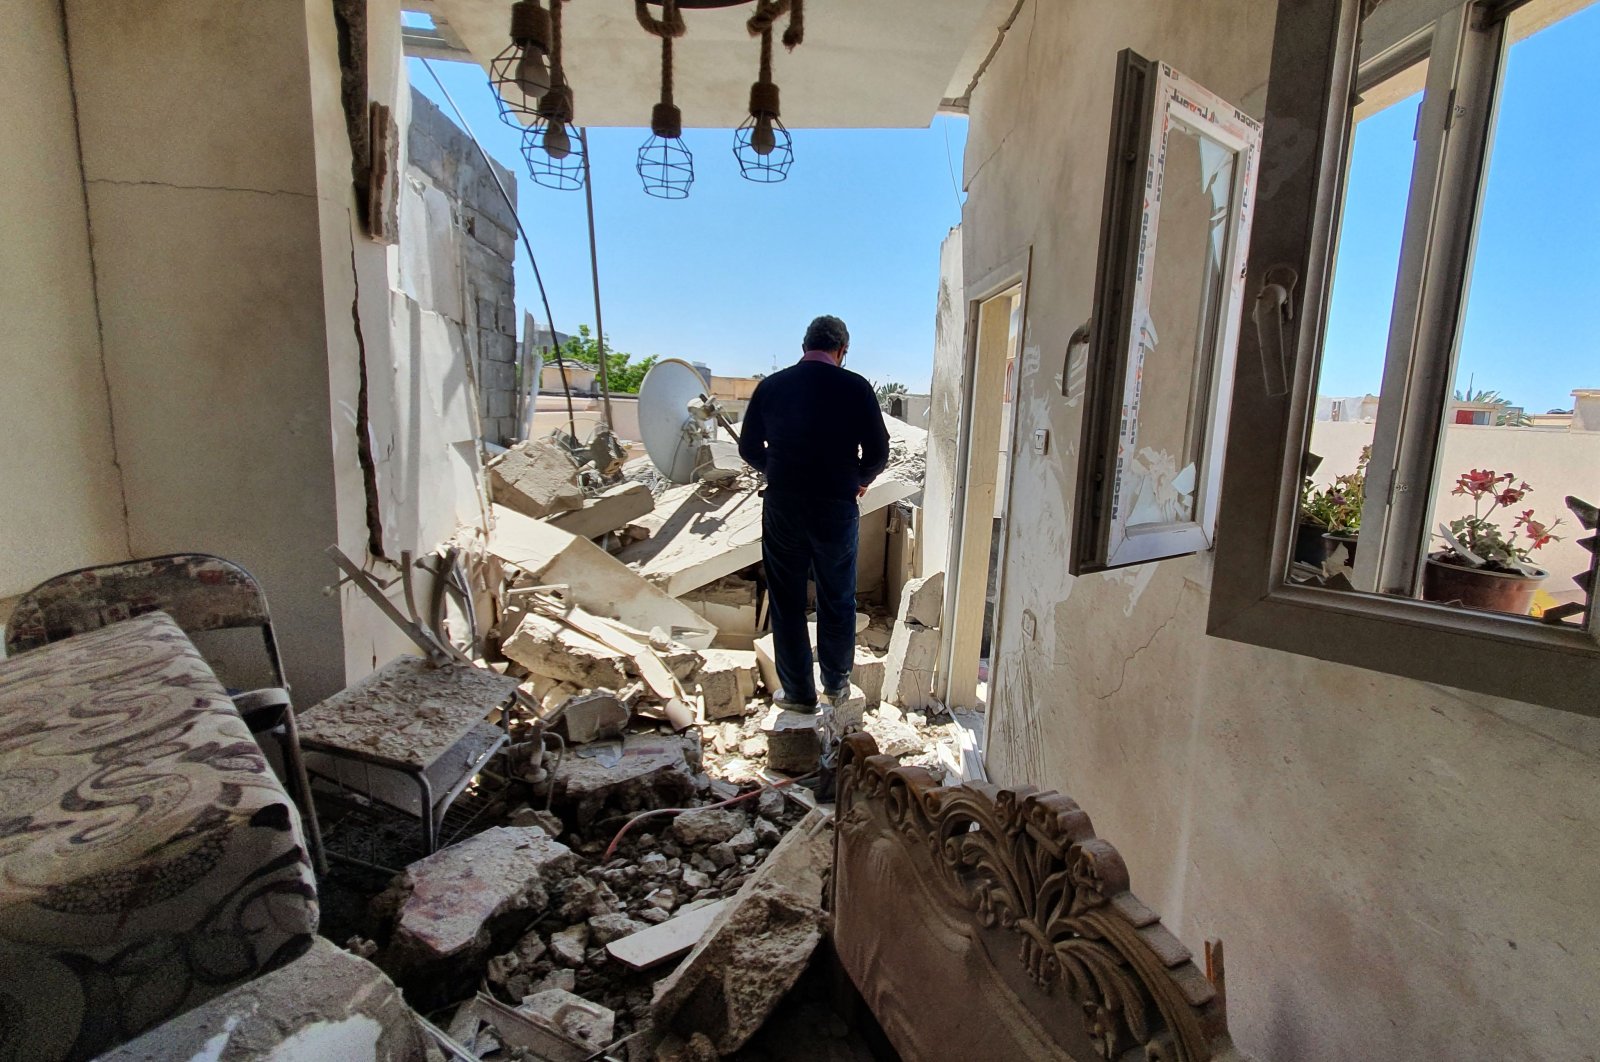  A resident walks amidst the rubble of a building that was damaged when putschist Gen. Khalifa Haftar's forces shelled the residential neighbourhood of Znatah in the Libyan capital Tripoli, held by the U.N.-recognized Government of National Accord (GNA), on May 1, 2020. (AFP Photo)